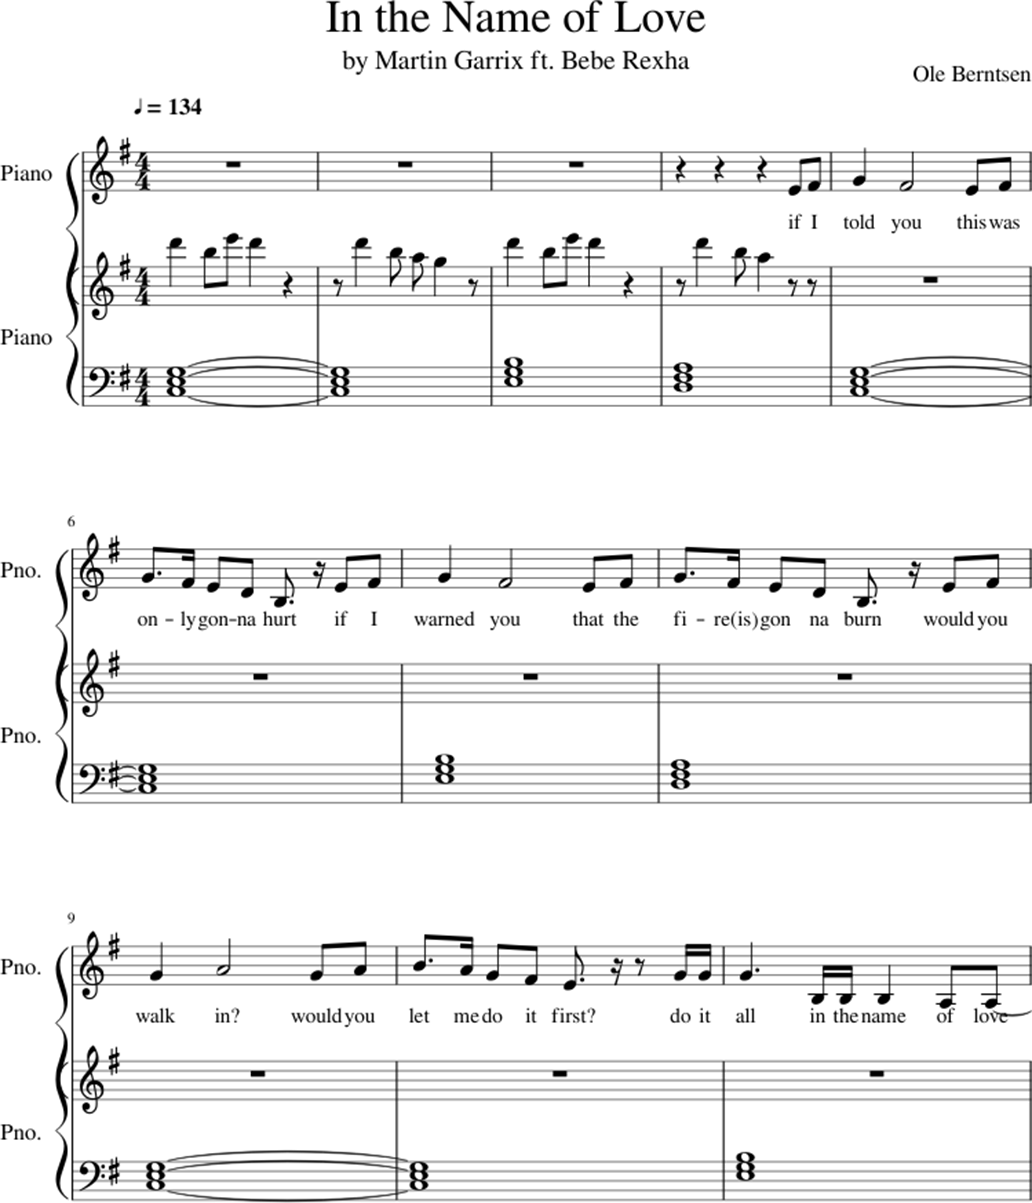 In the name of love sheet music notes 1